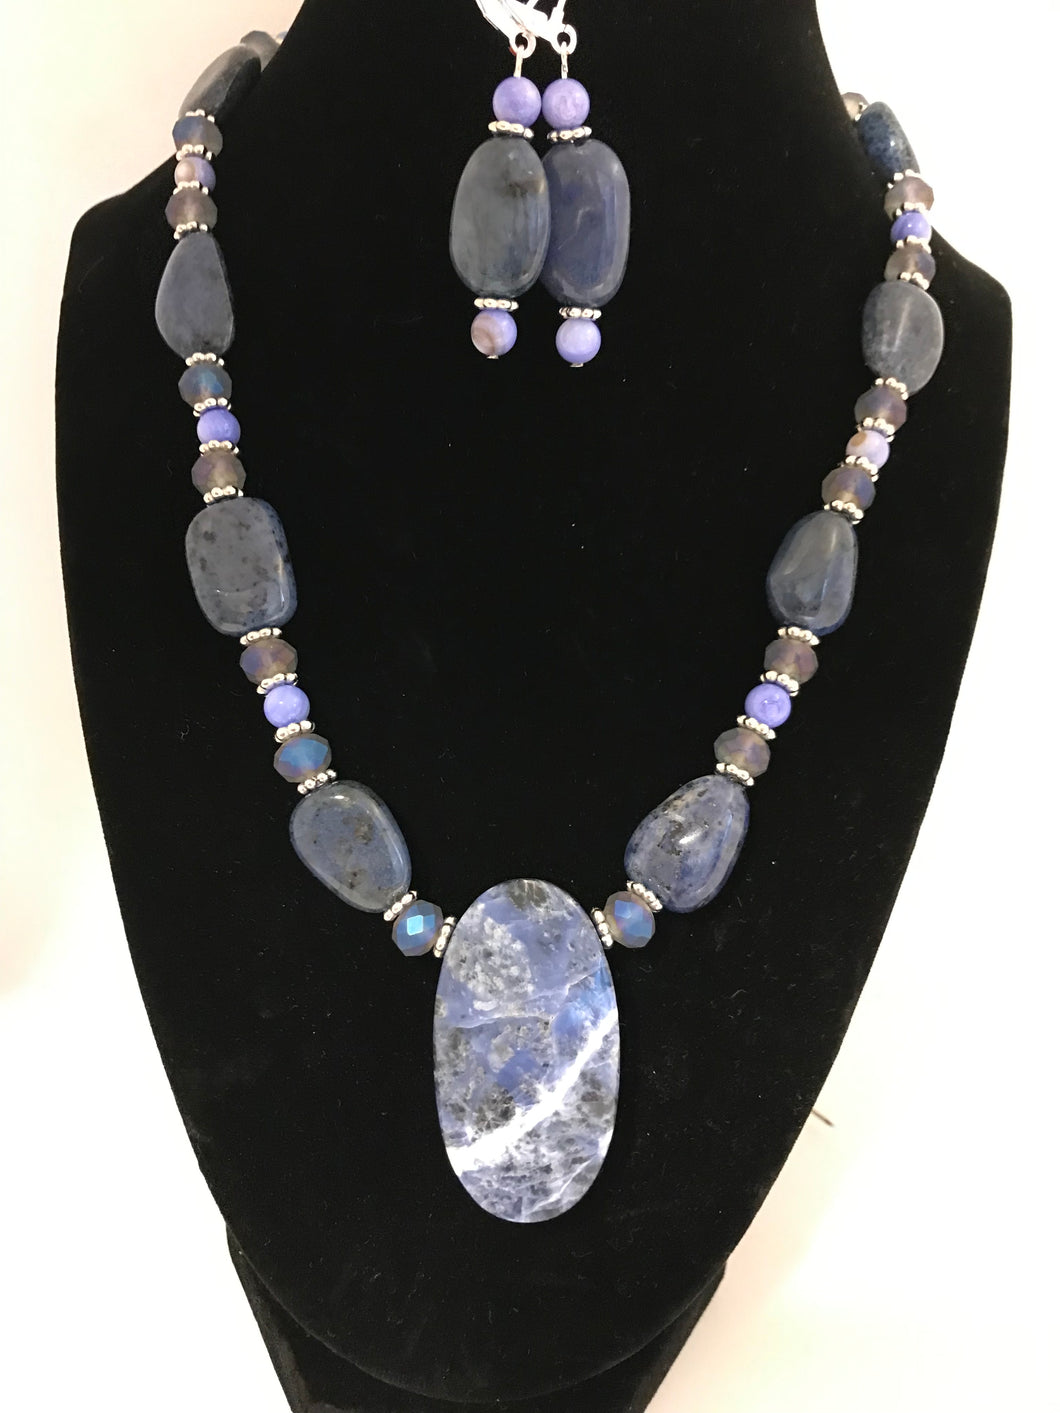 Sodalite pendant with dumortierite beads with matching earrings